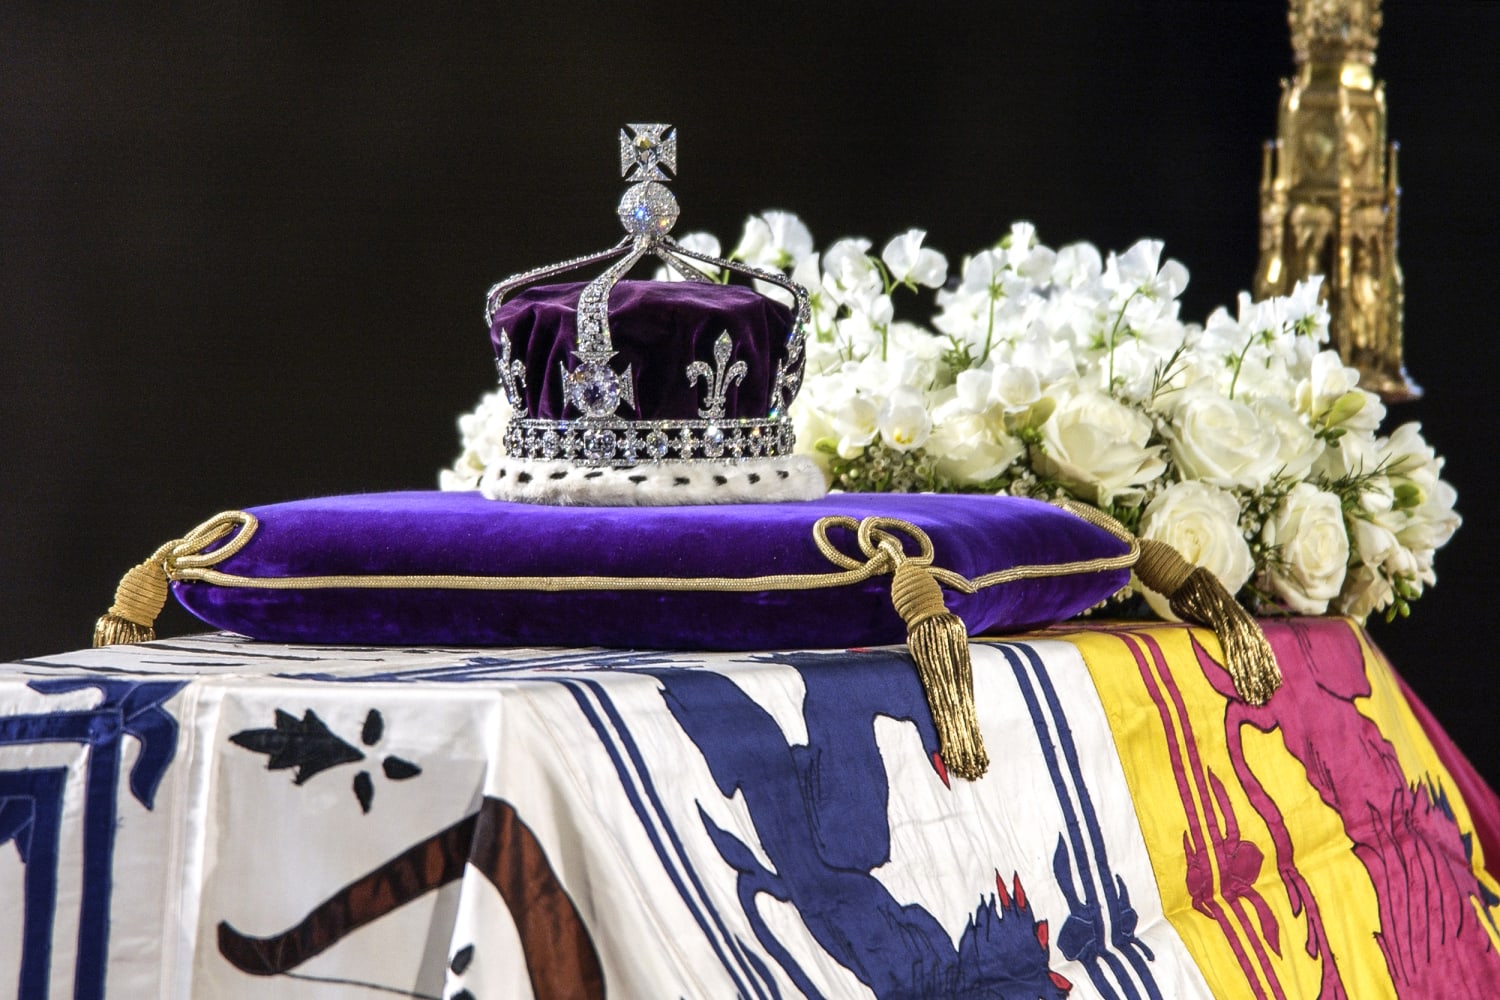 The Kohinoor diamond was obtained by the British Empire photo